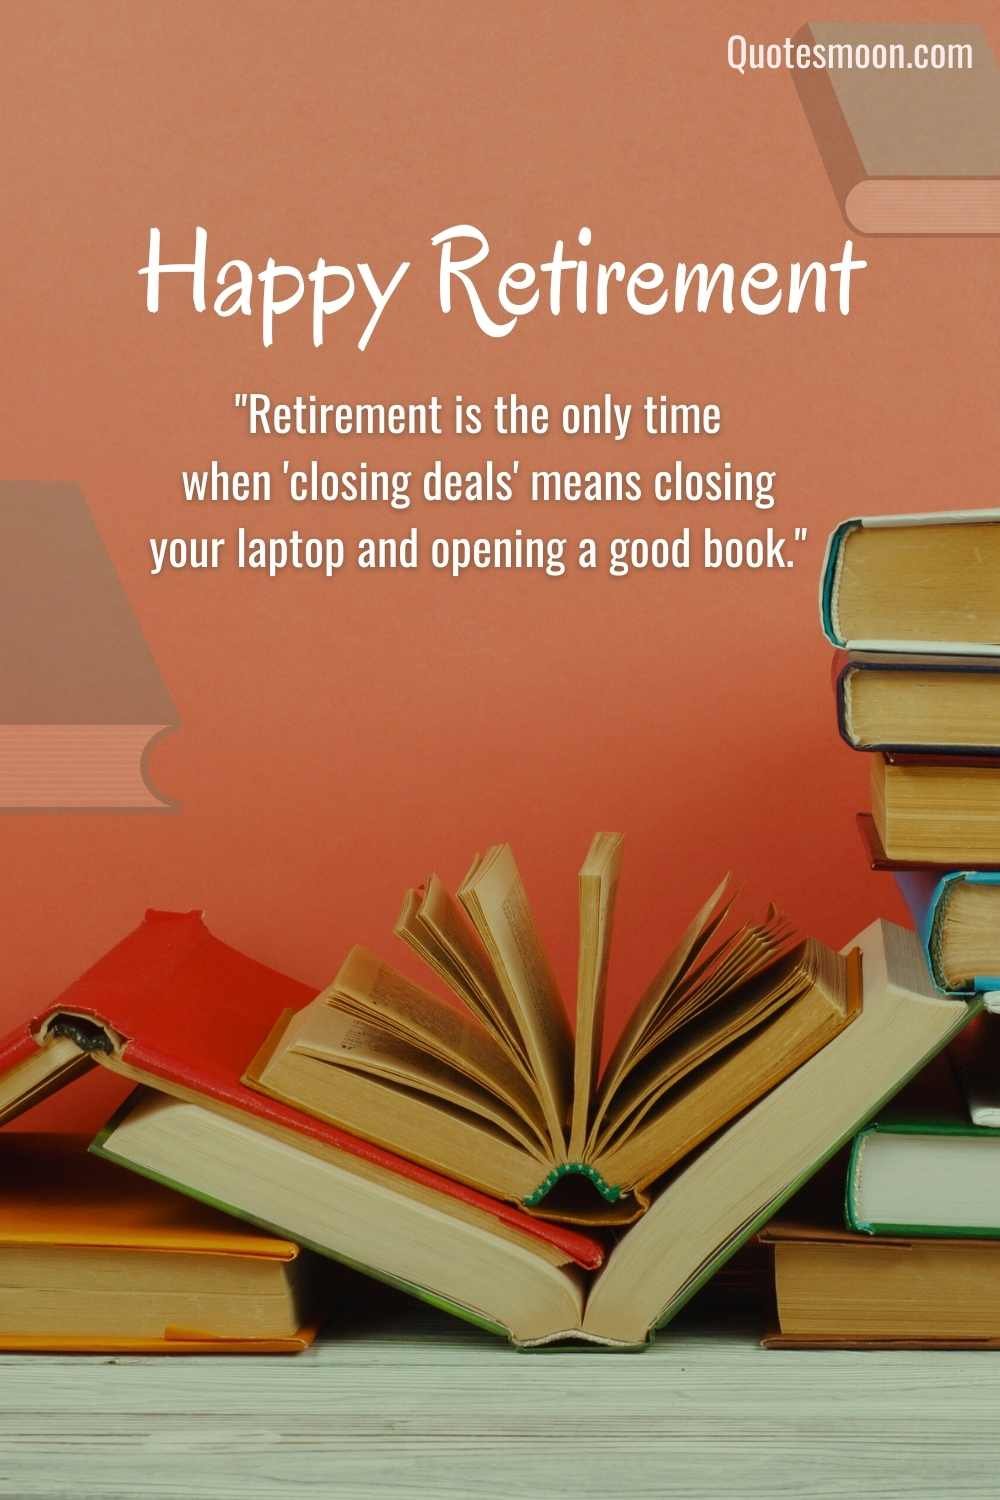 Retirement image Messages For boss with pics